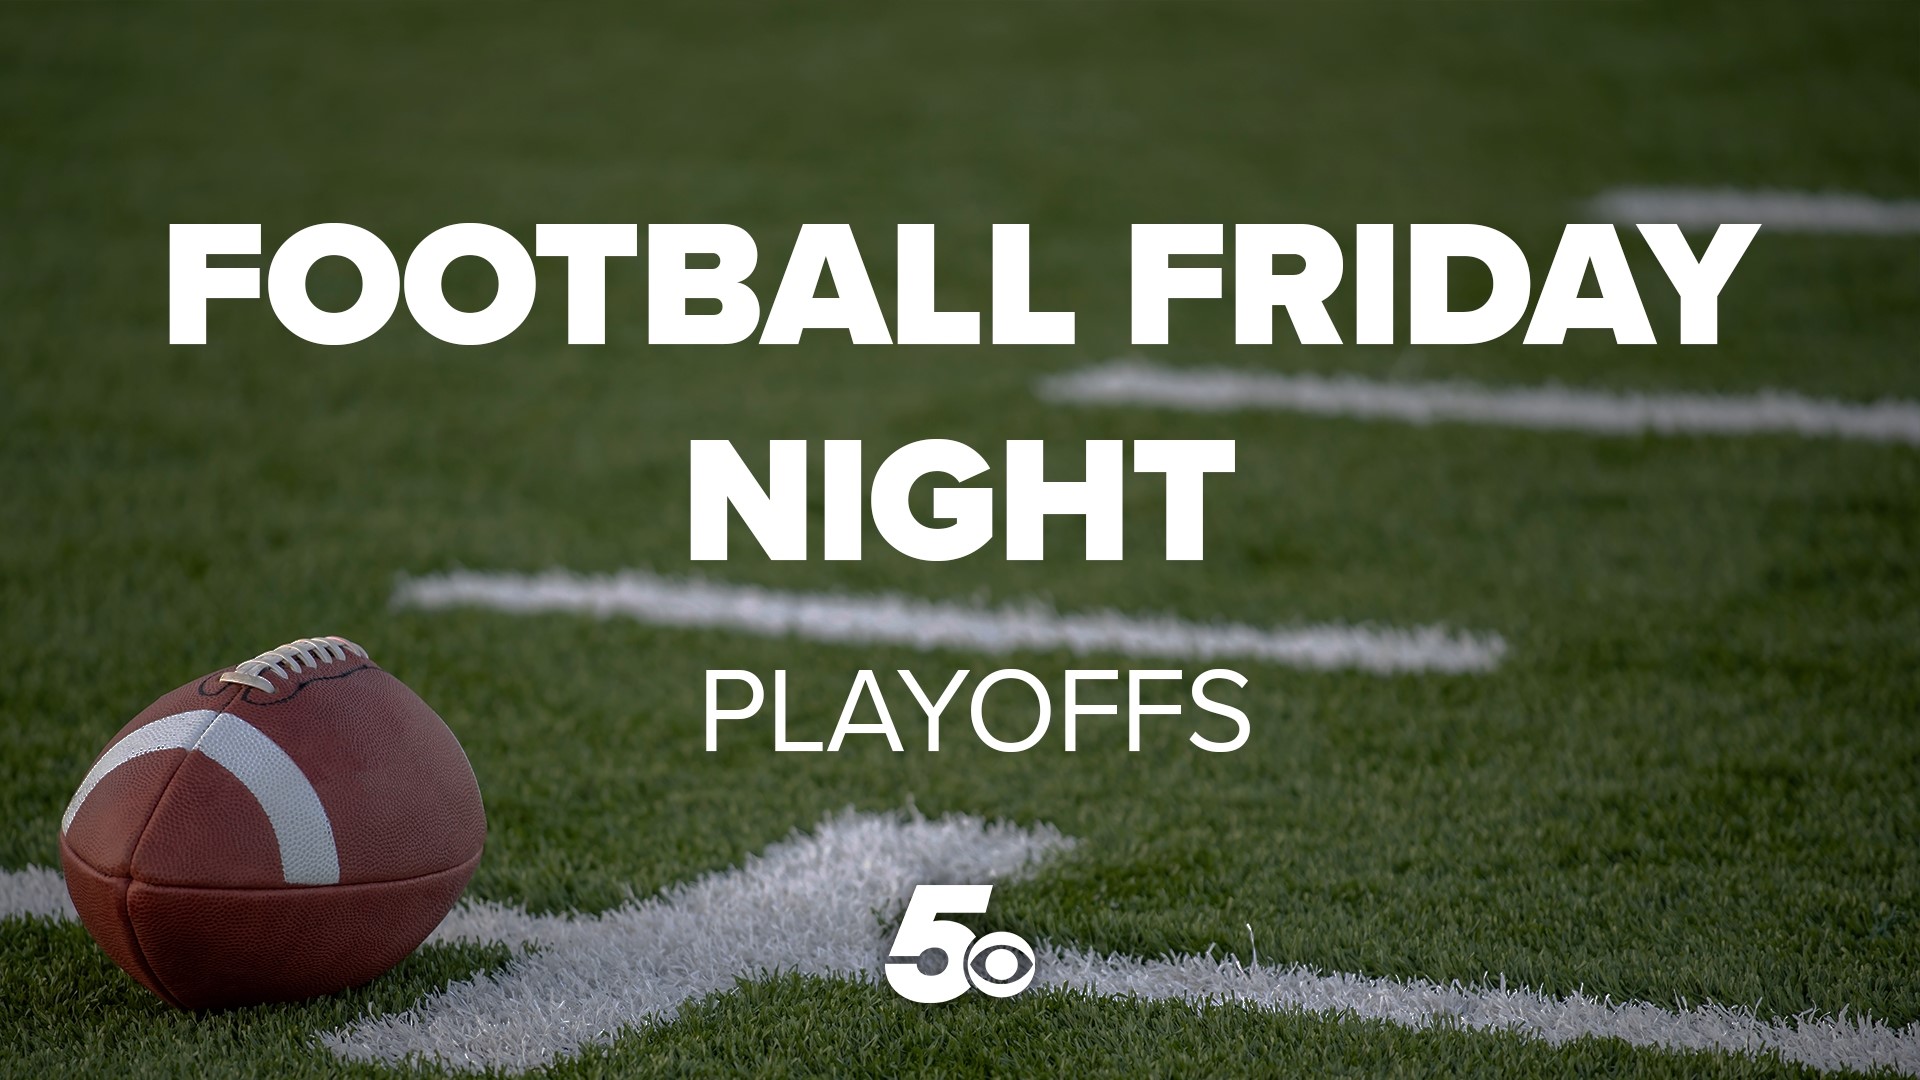 Here's a look at the second week of playoff scores and highlights for high school football!